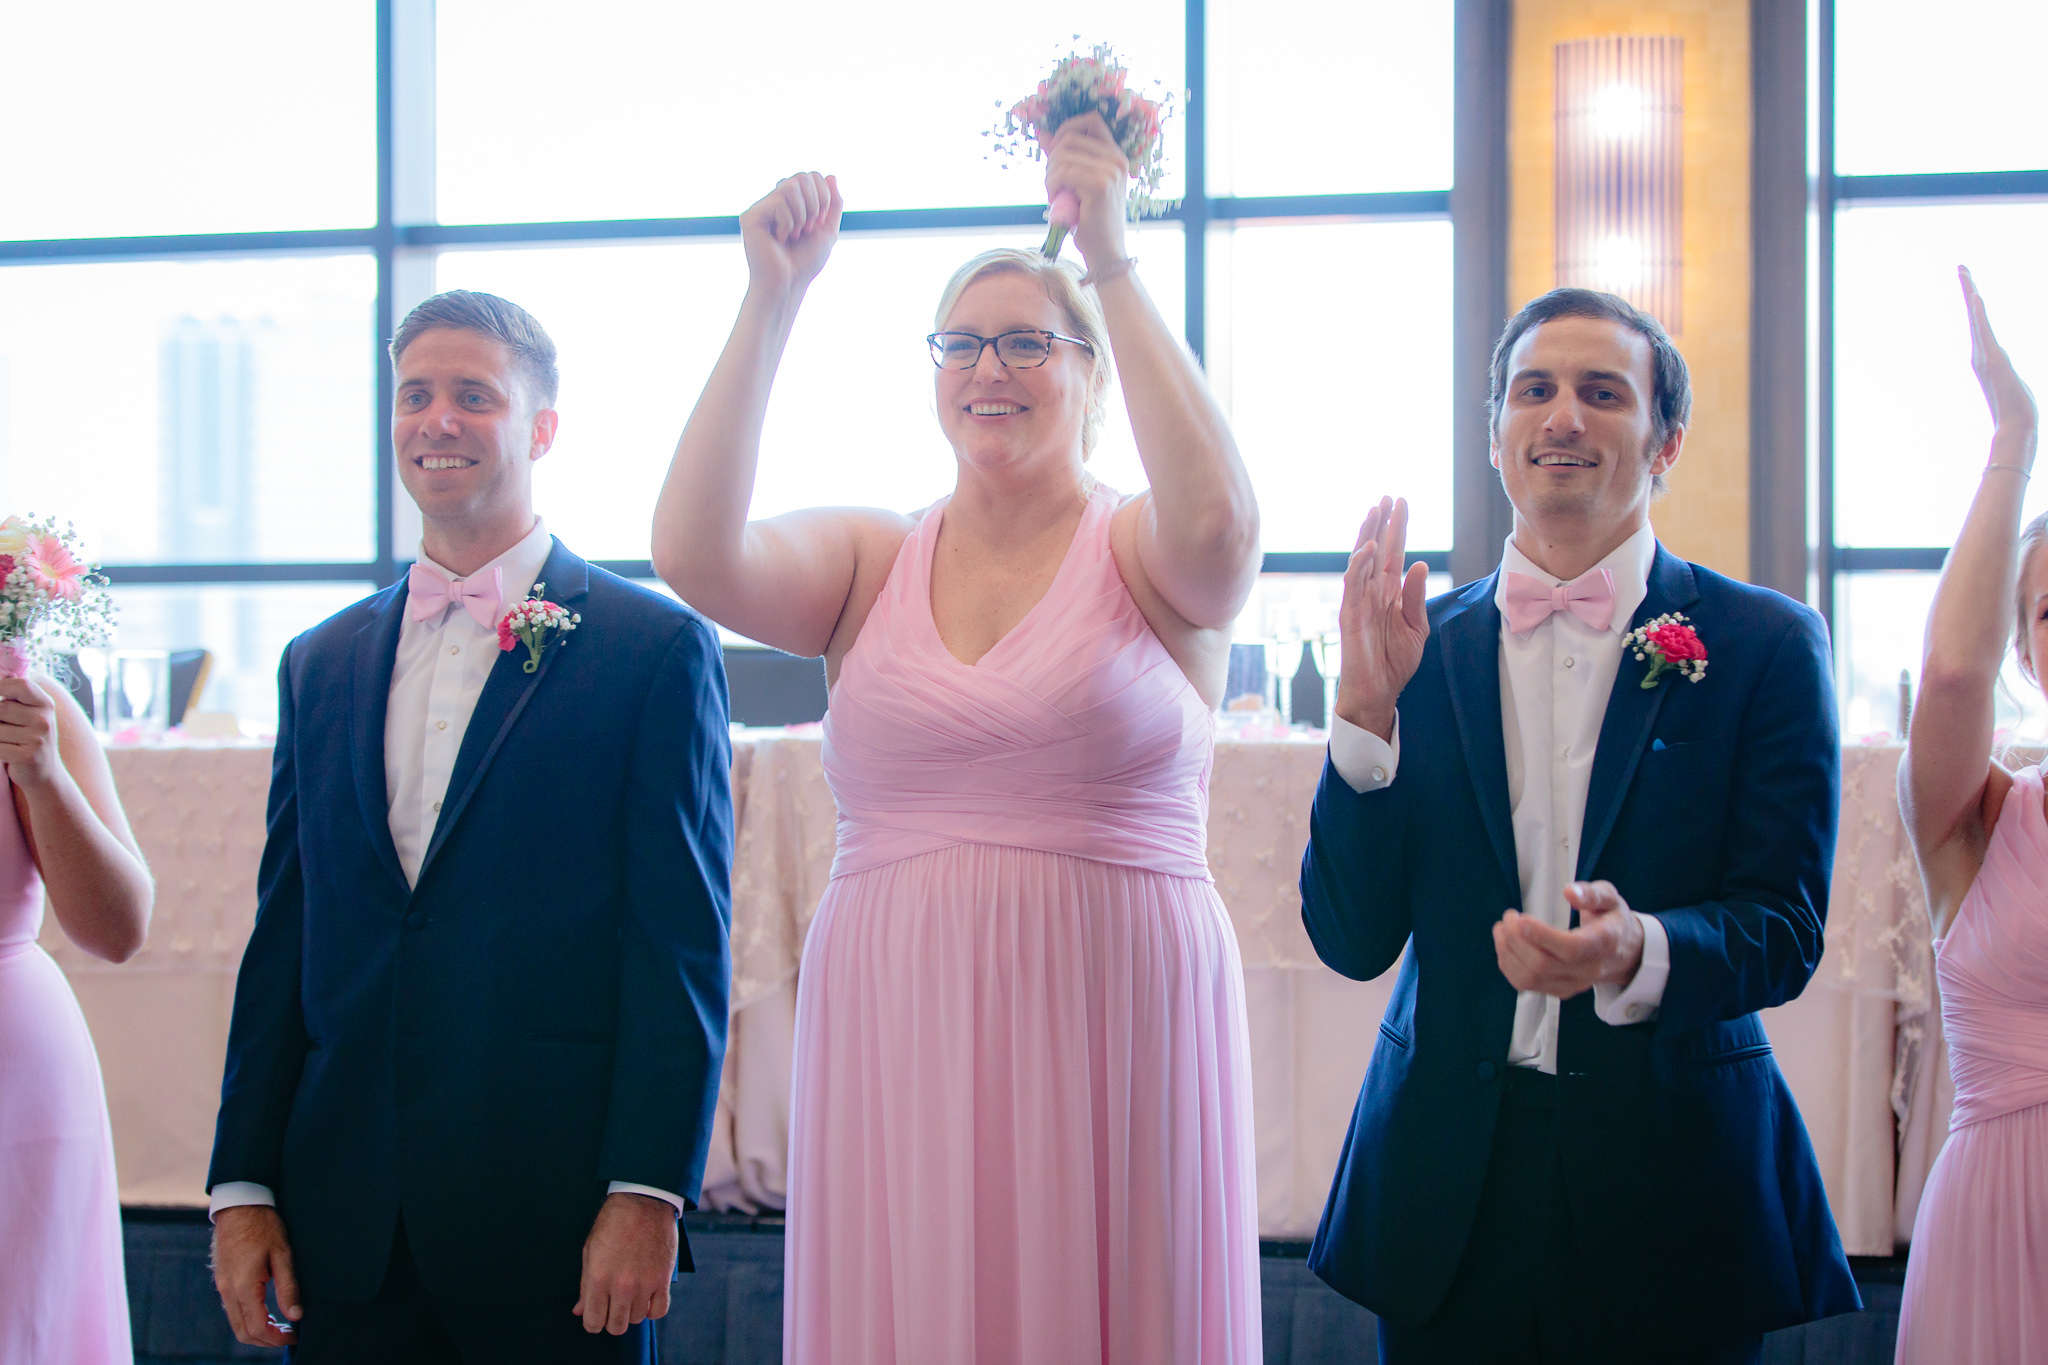 Sister of the groom cheers as newlyweds enter their Duquesne University wedding reception